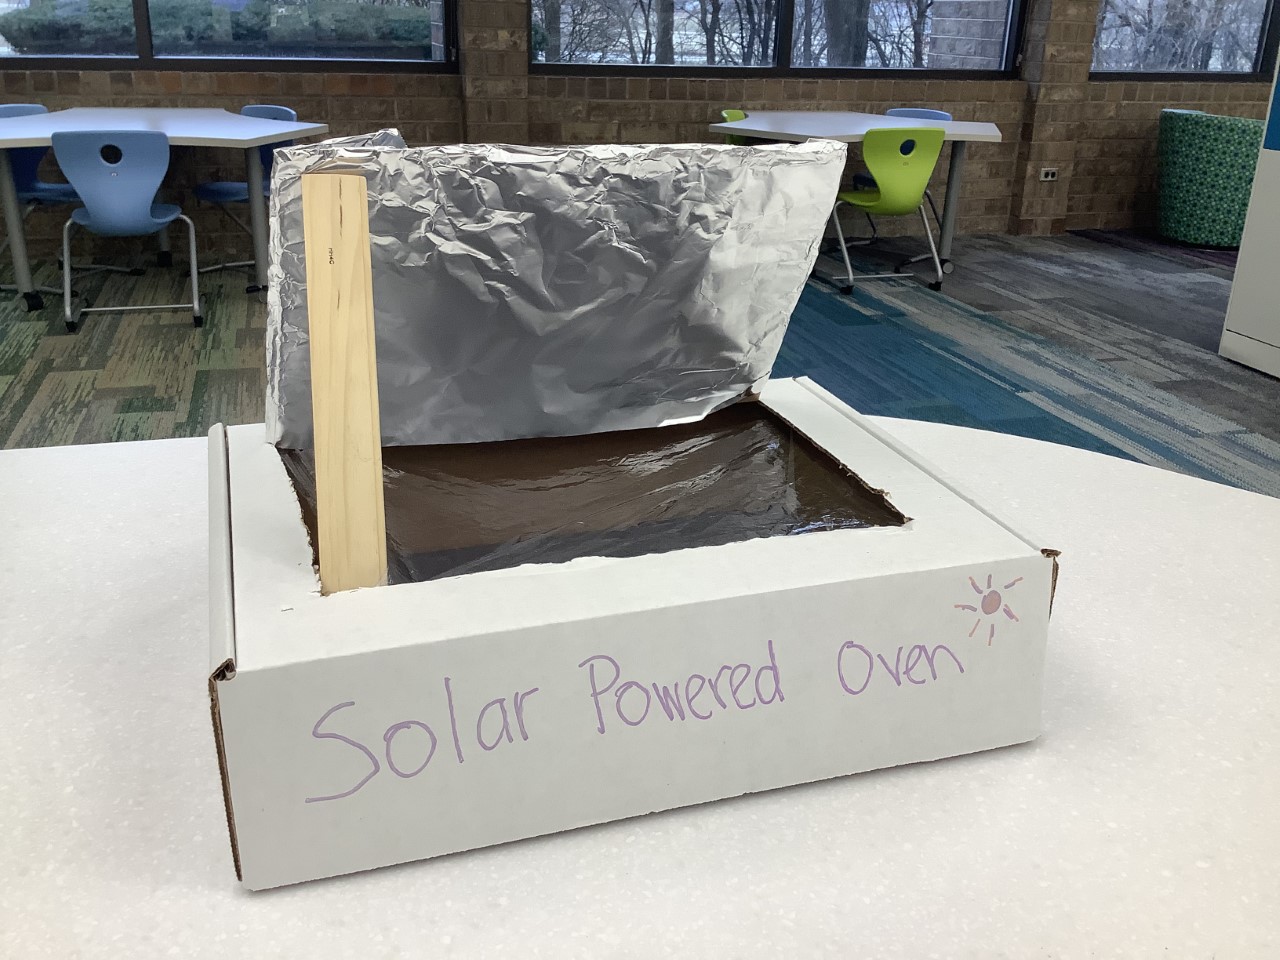 Solar Powered Oven 